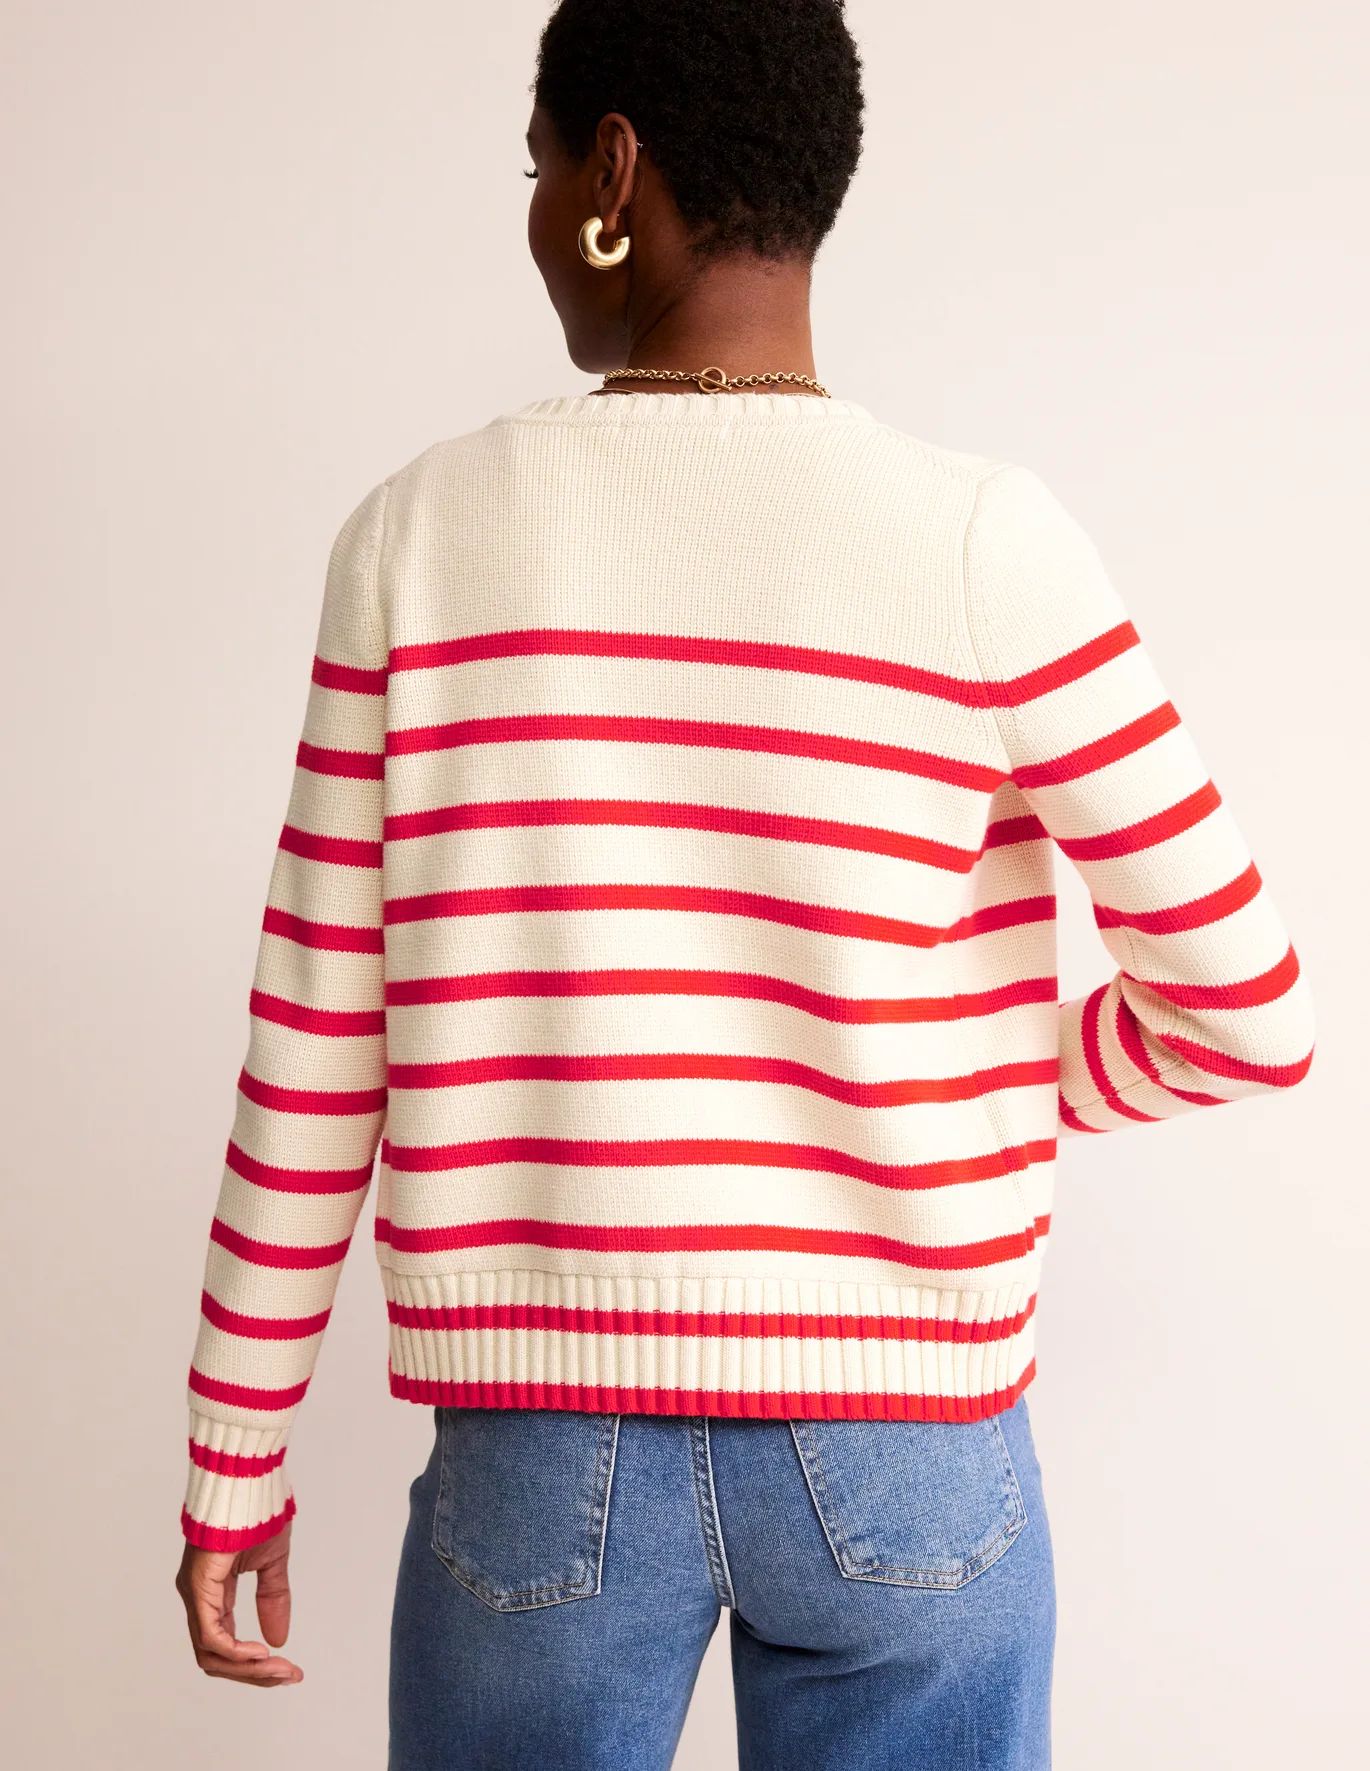 Warm Ivory, Flame Red Stripe | Boden (US)